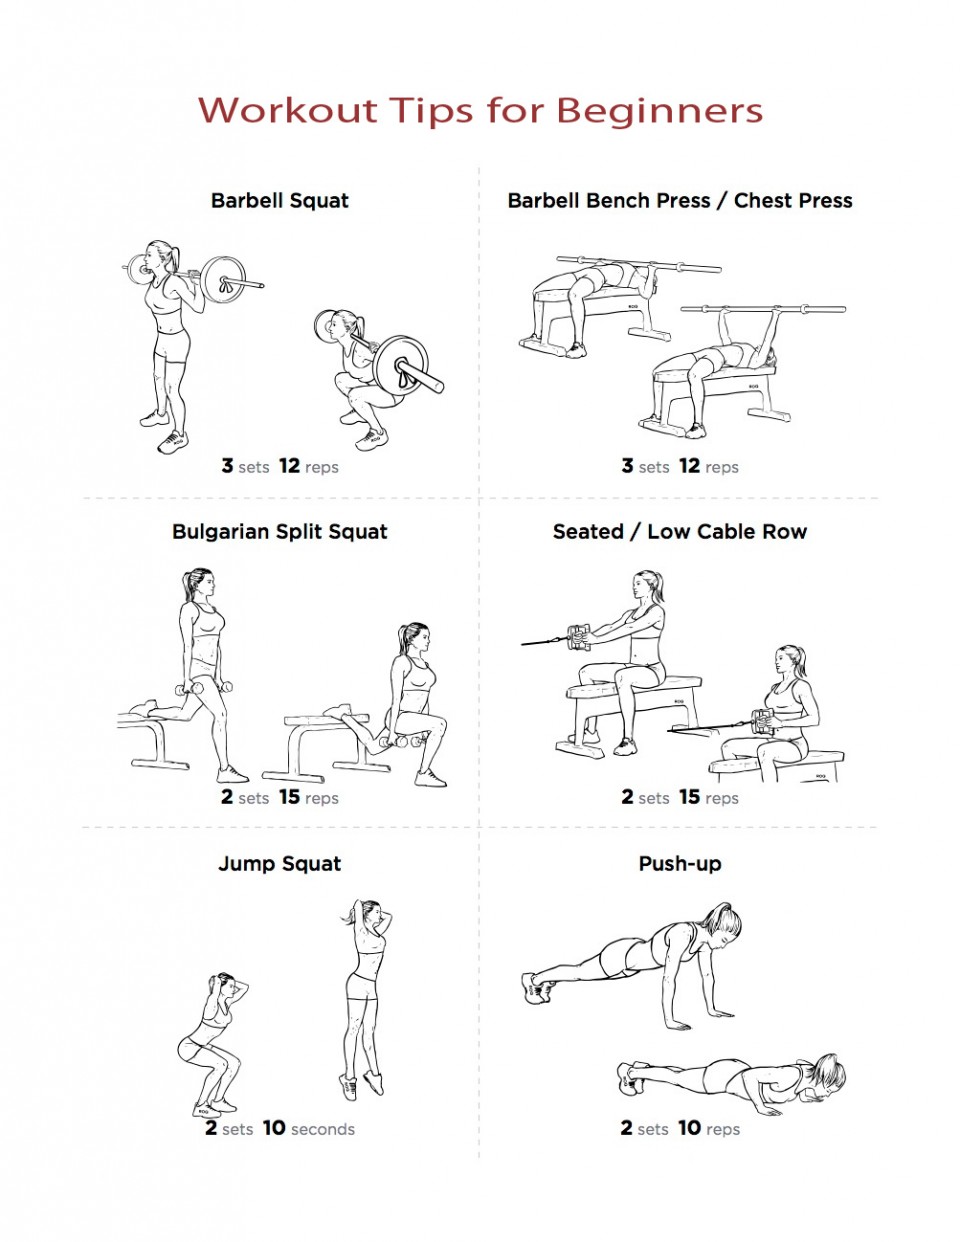 Workout-Tips-for-Beginners